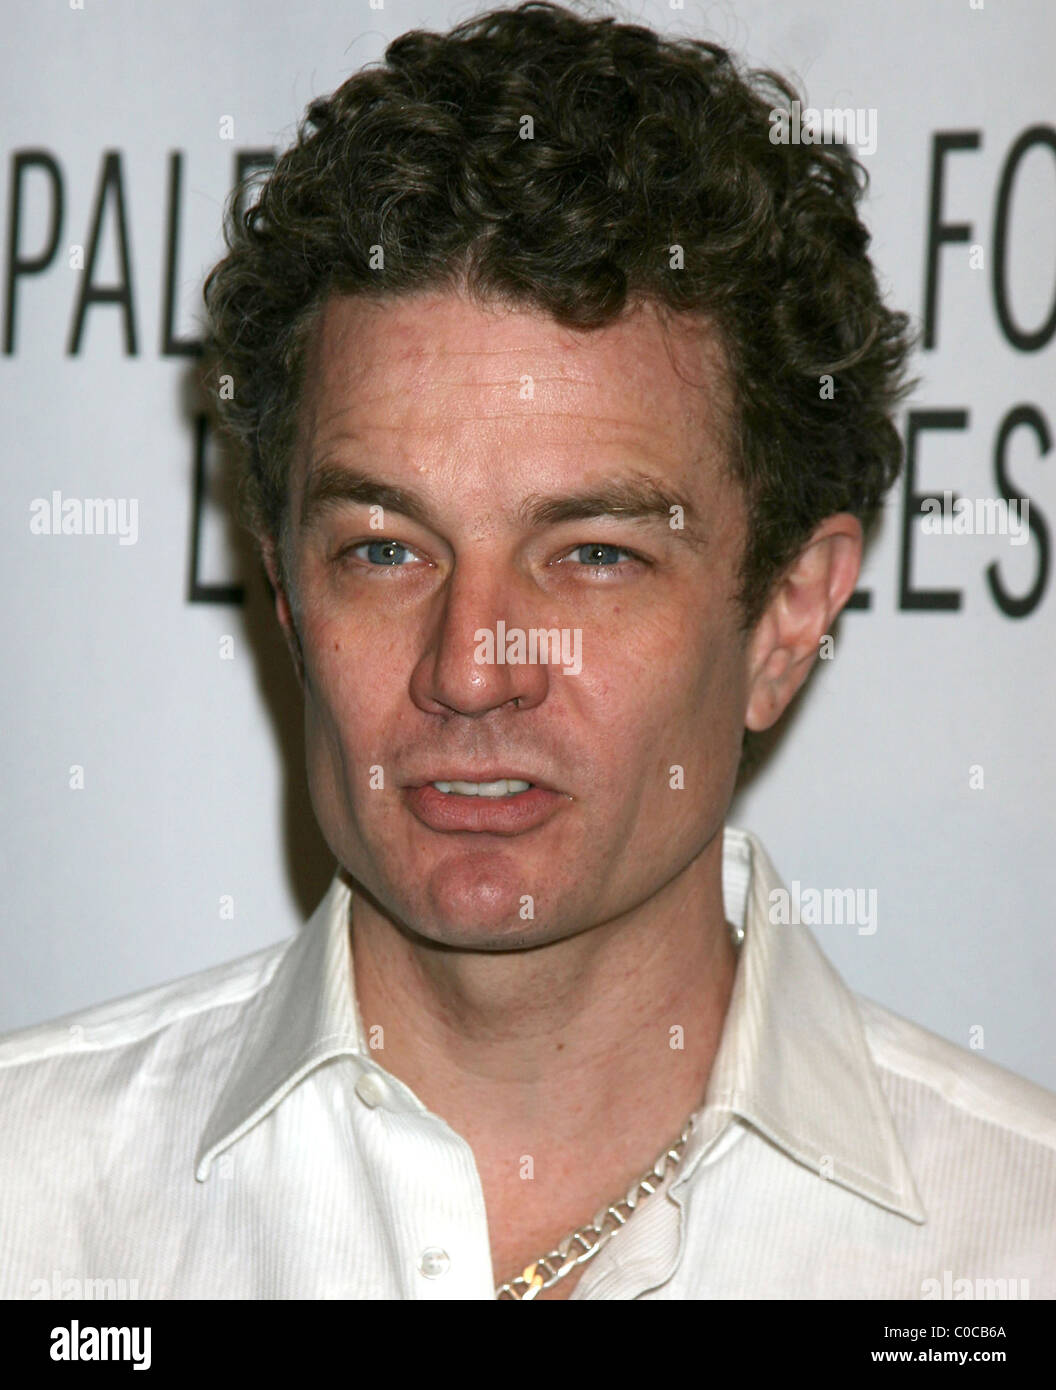 James Marsters 'Buffy the Vampire Slayer' réunion Pour Paley Center for Media's 24e William S. Paley Television Festival Banque D'Images